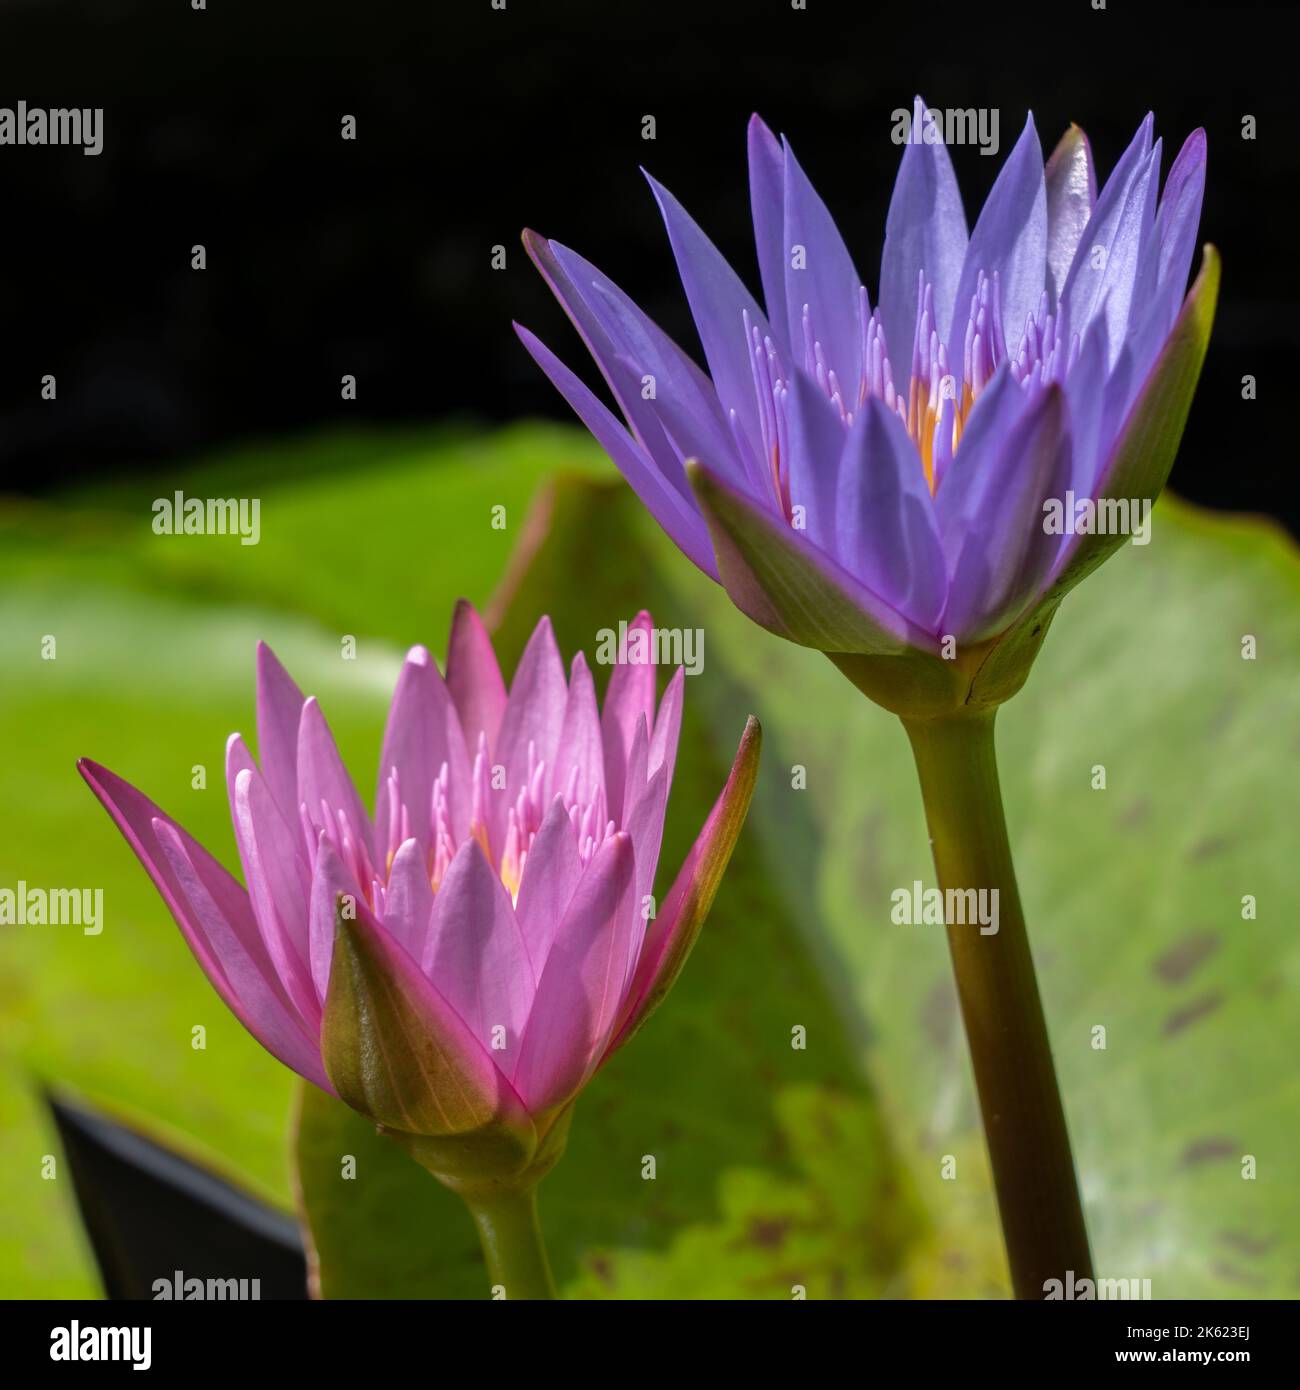 Closeup view of bright pink and purple blue tropical water lily flowers blooming on dark natural background Stock Photo